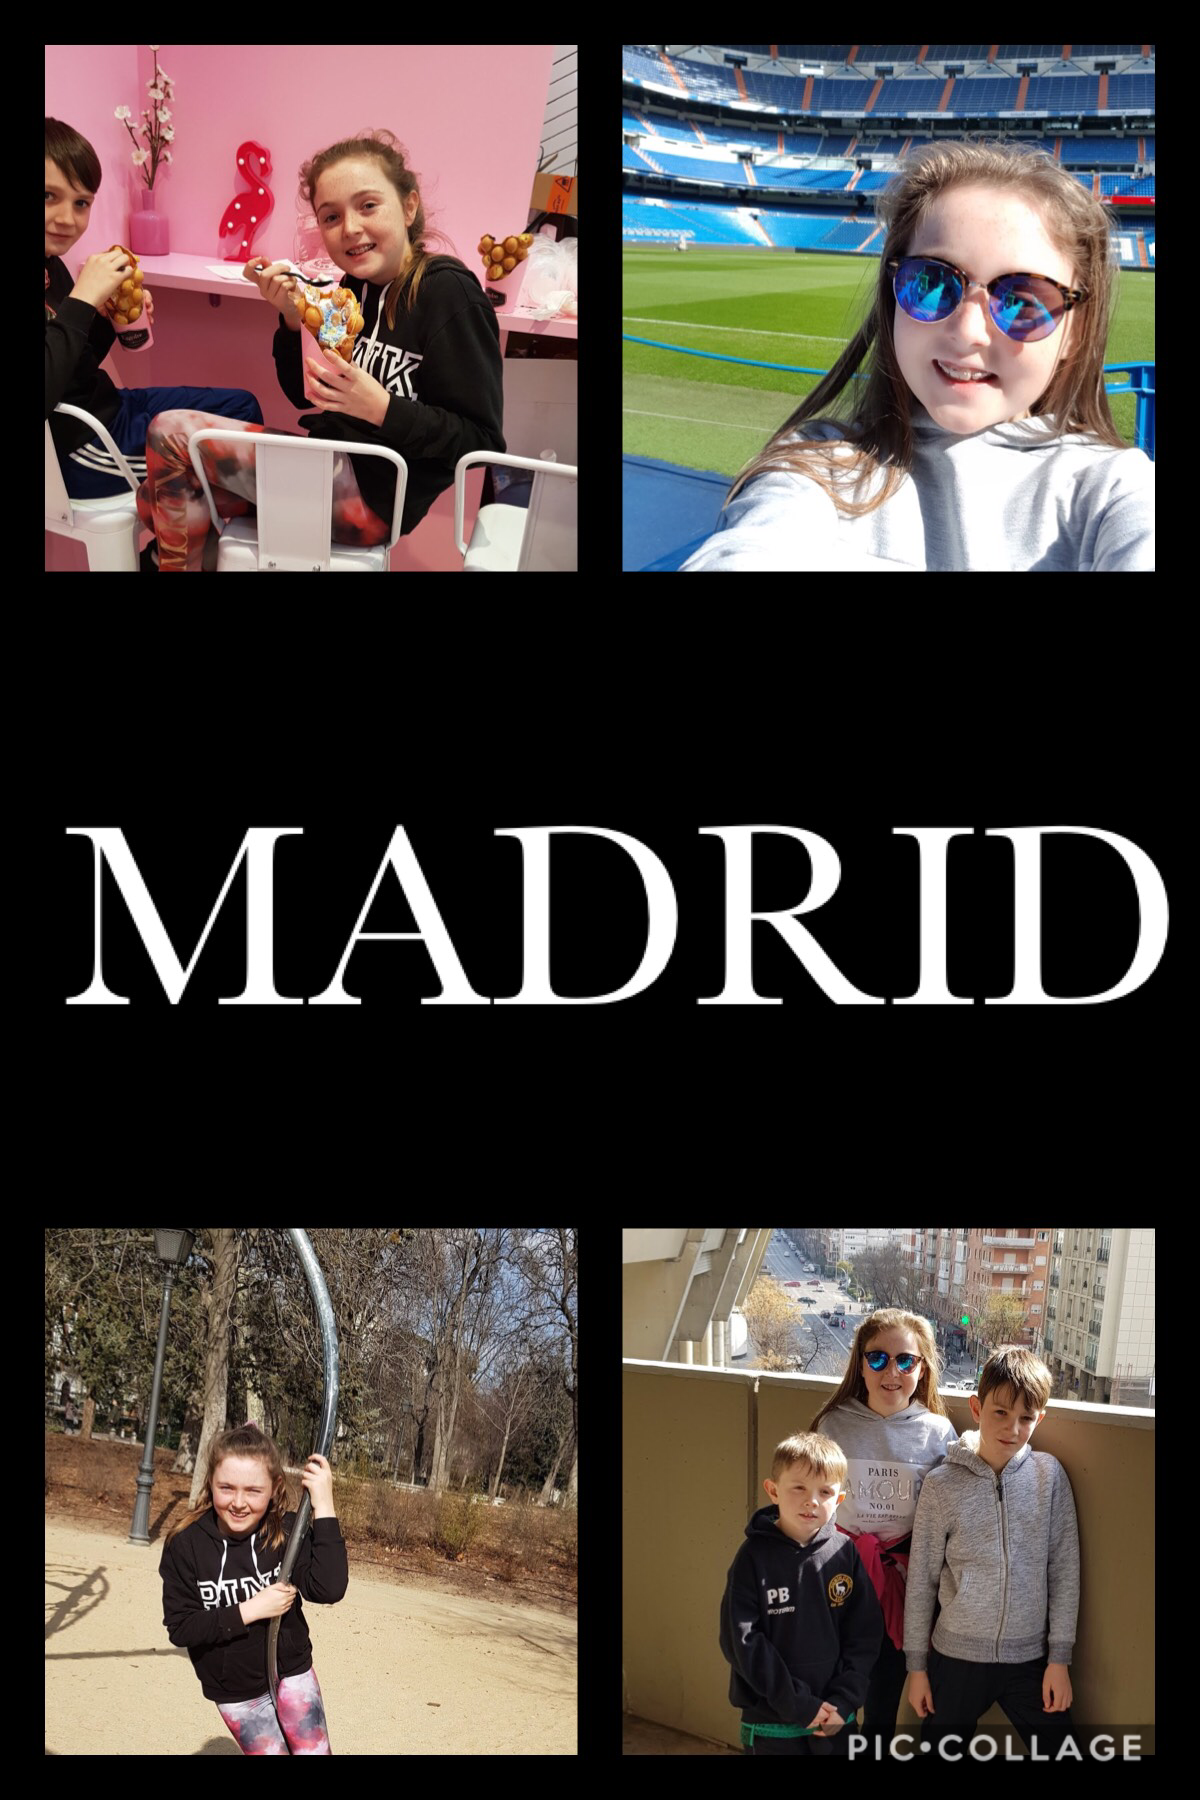 Madrid is such a nice city I hope I will go there again in the future😀😄😆